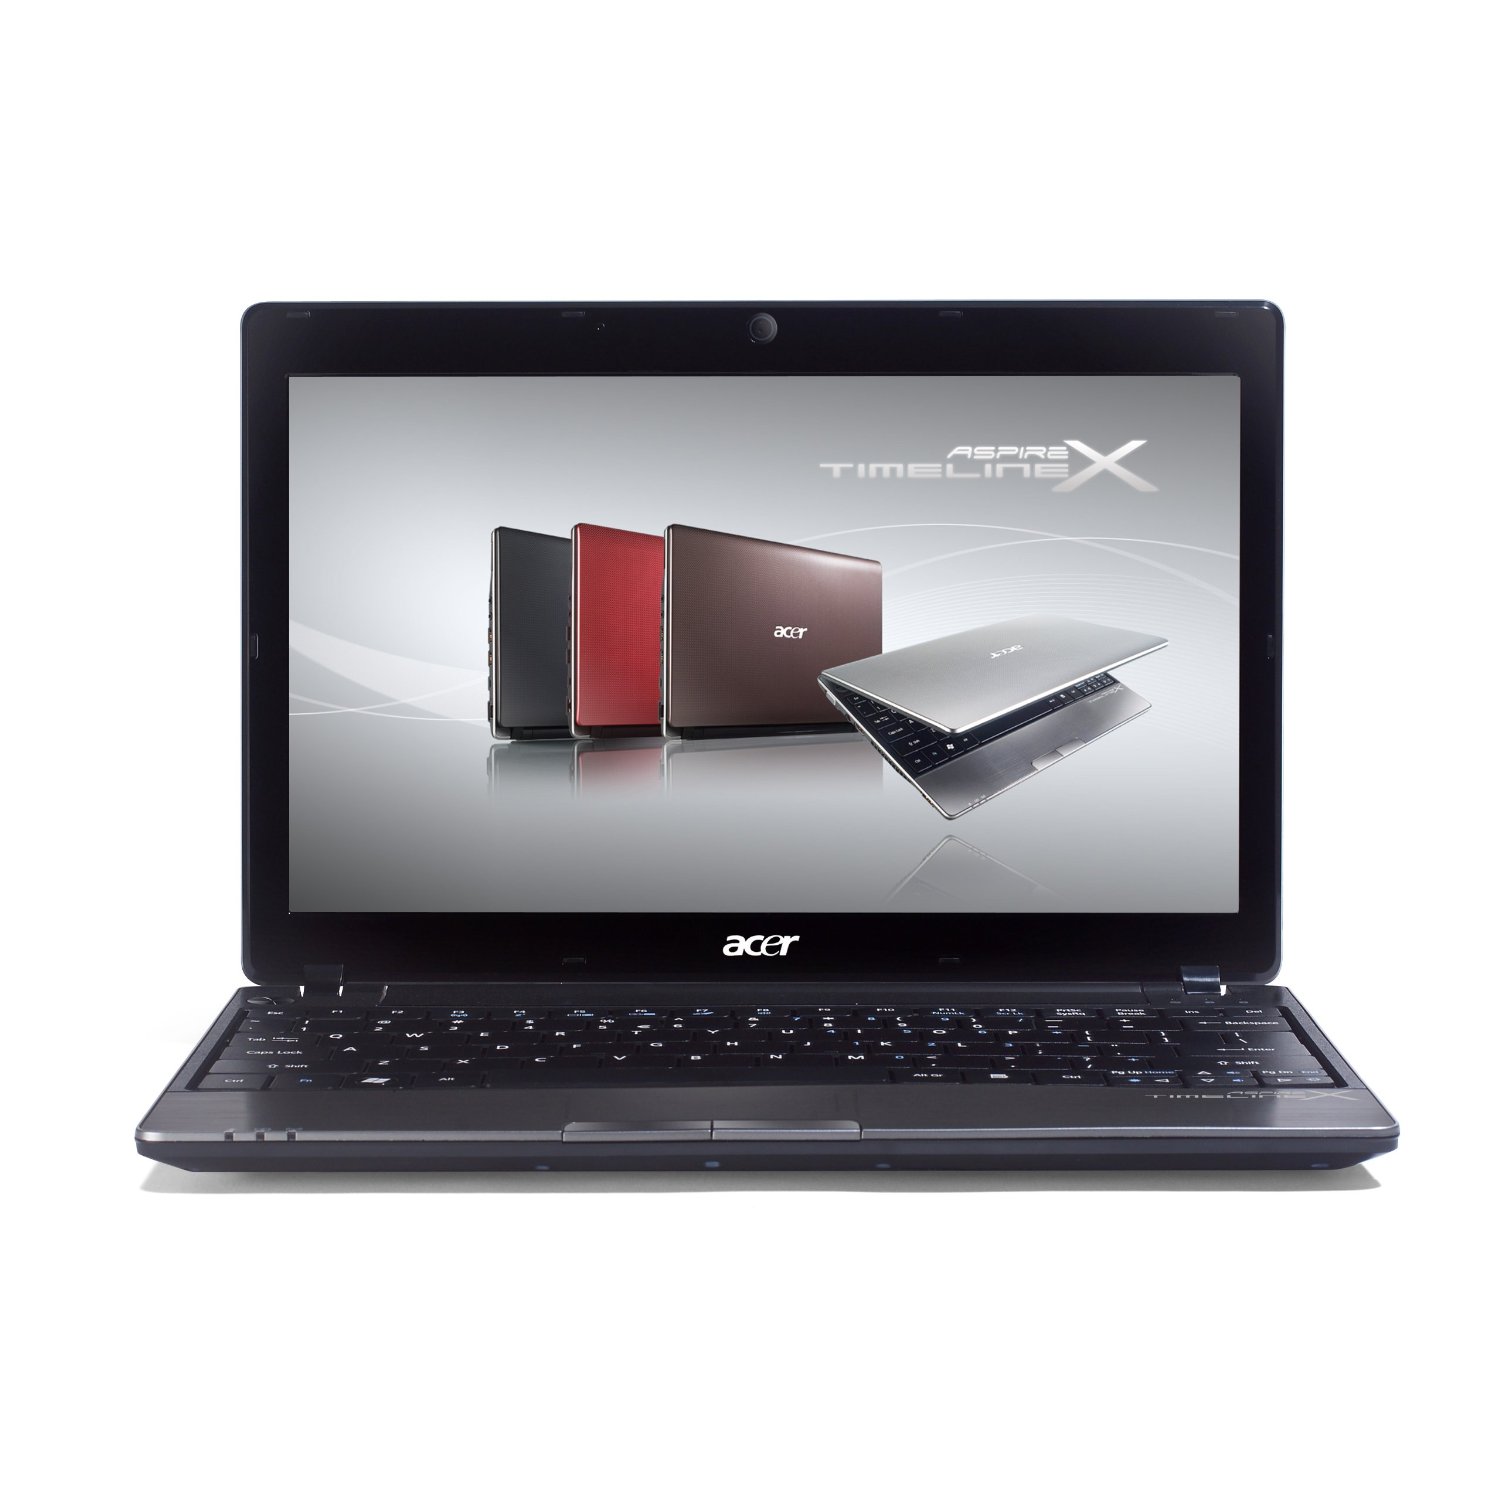 http://thetechjournal.com/wp-content/uploads/images/1111/1320424023-acer-aspire-timelinex-as1830t6651-116inch-laptop-6.jpg